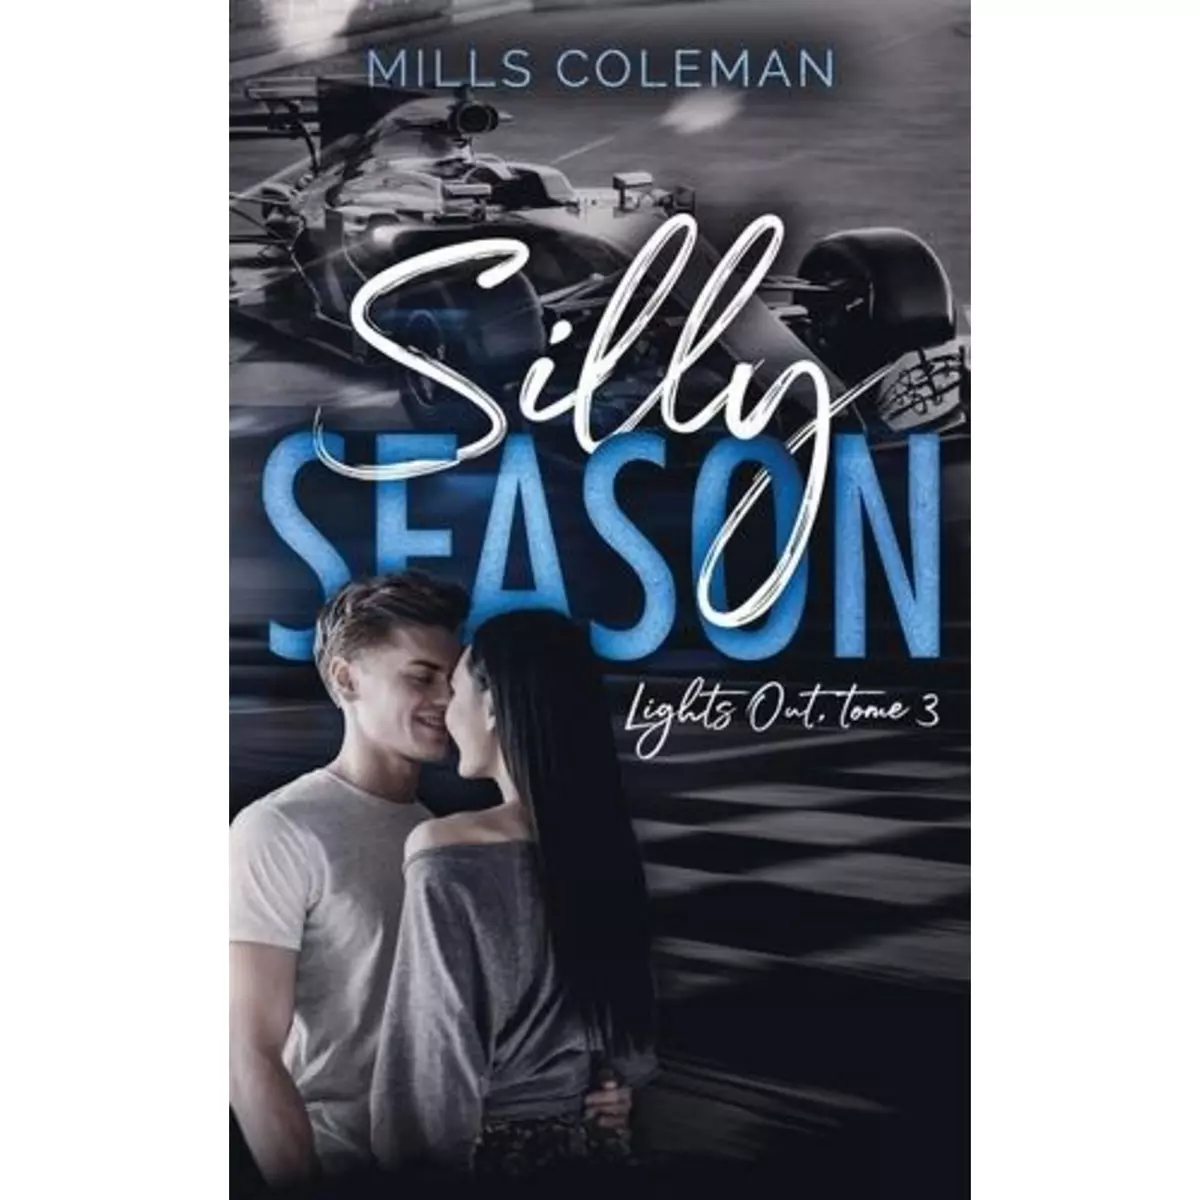  LIGHTS OUT TOME 3 : SILLY SEASON, Coleman Mills